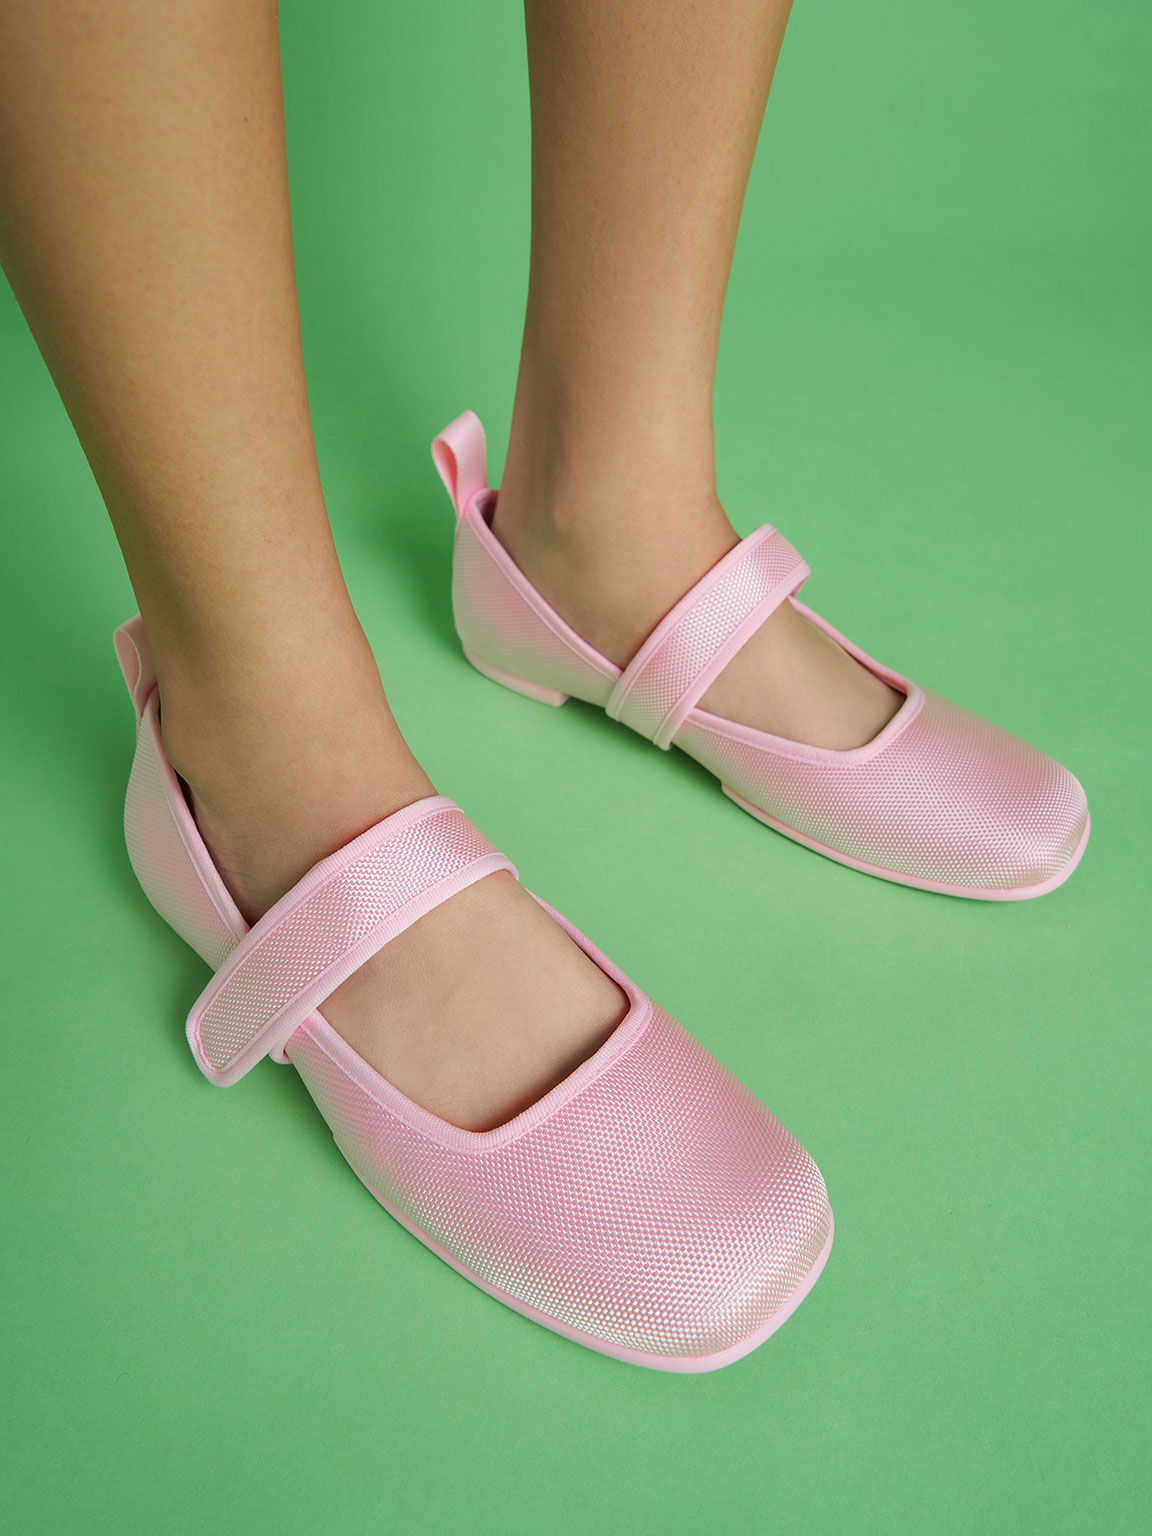 Nori Recycled Polyester Mary Jane Flats, Light Pink, hi-res